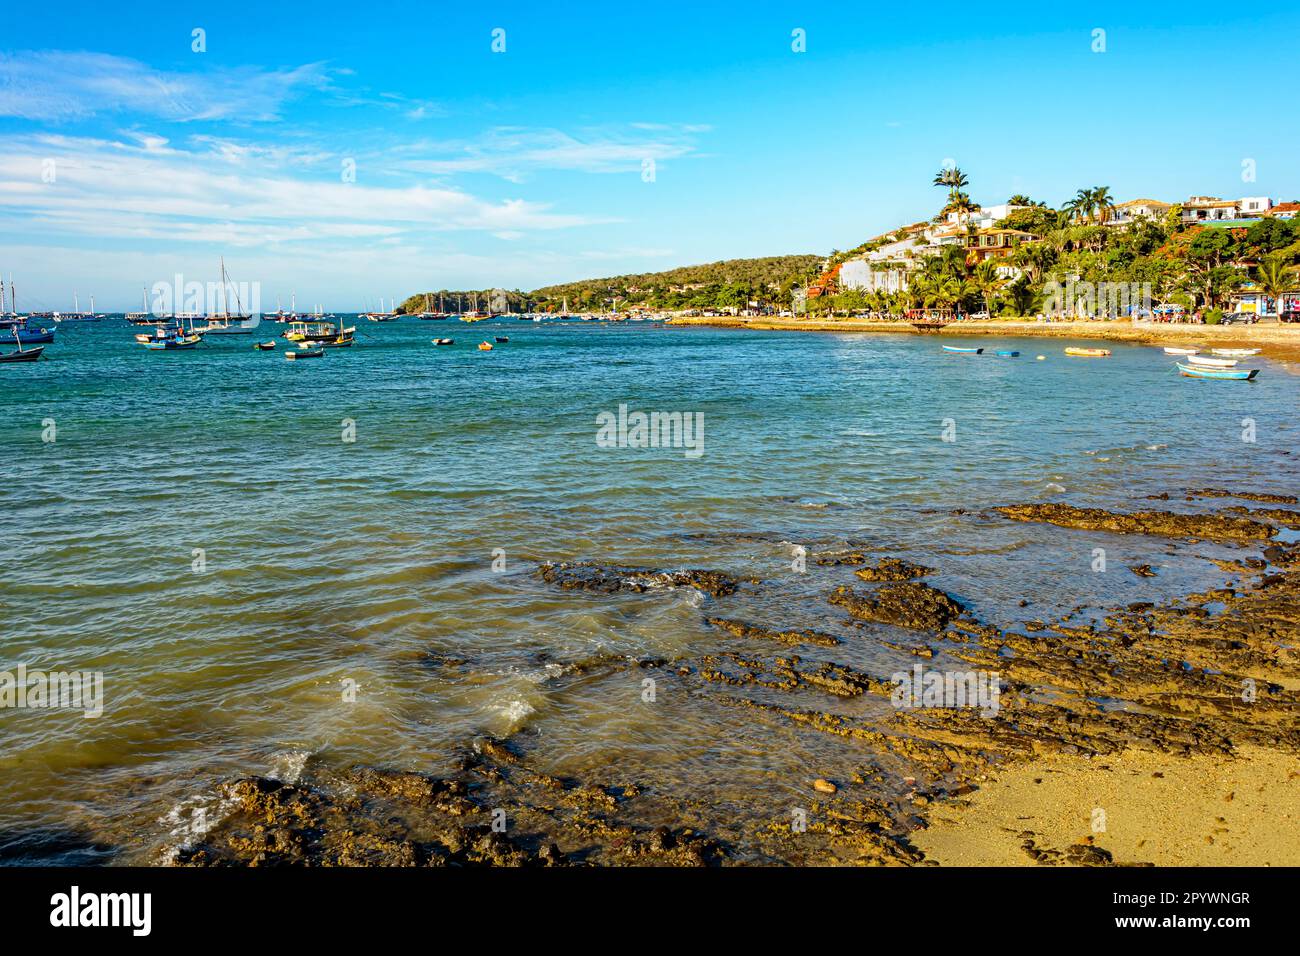 Panaroma of downtown Buzios in Rio de Janeiro with the sea, the beach and the boats, Brasil Stock Photo